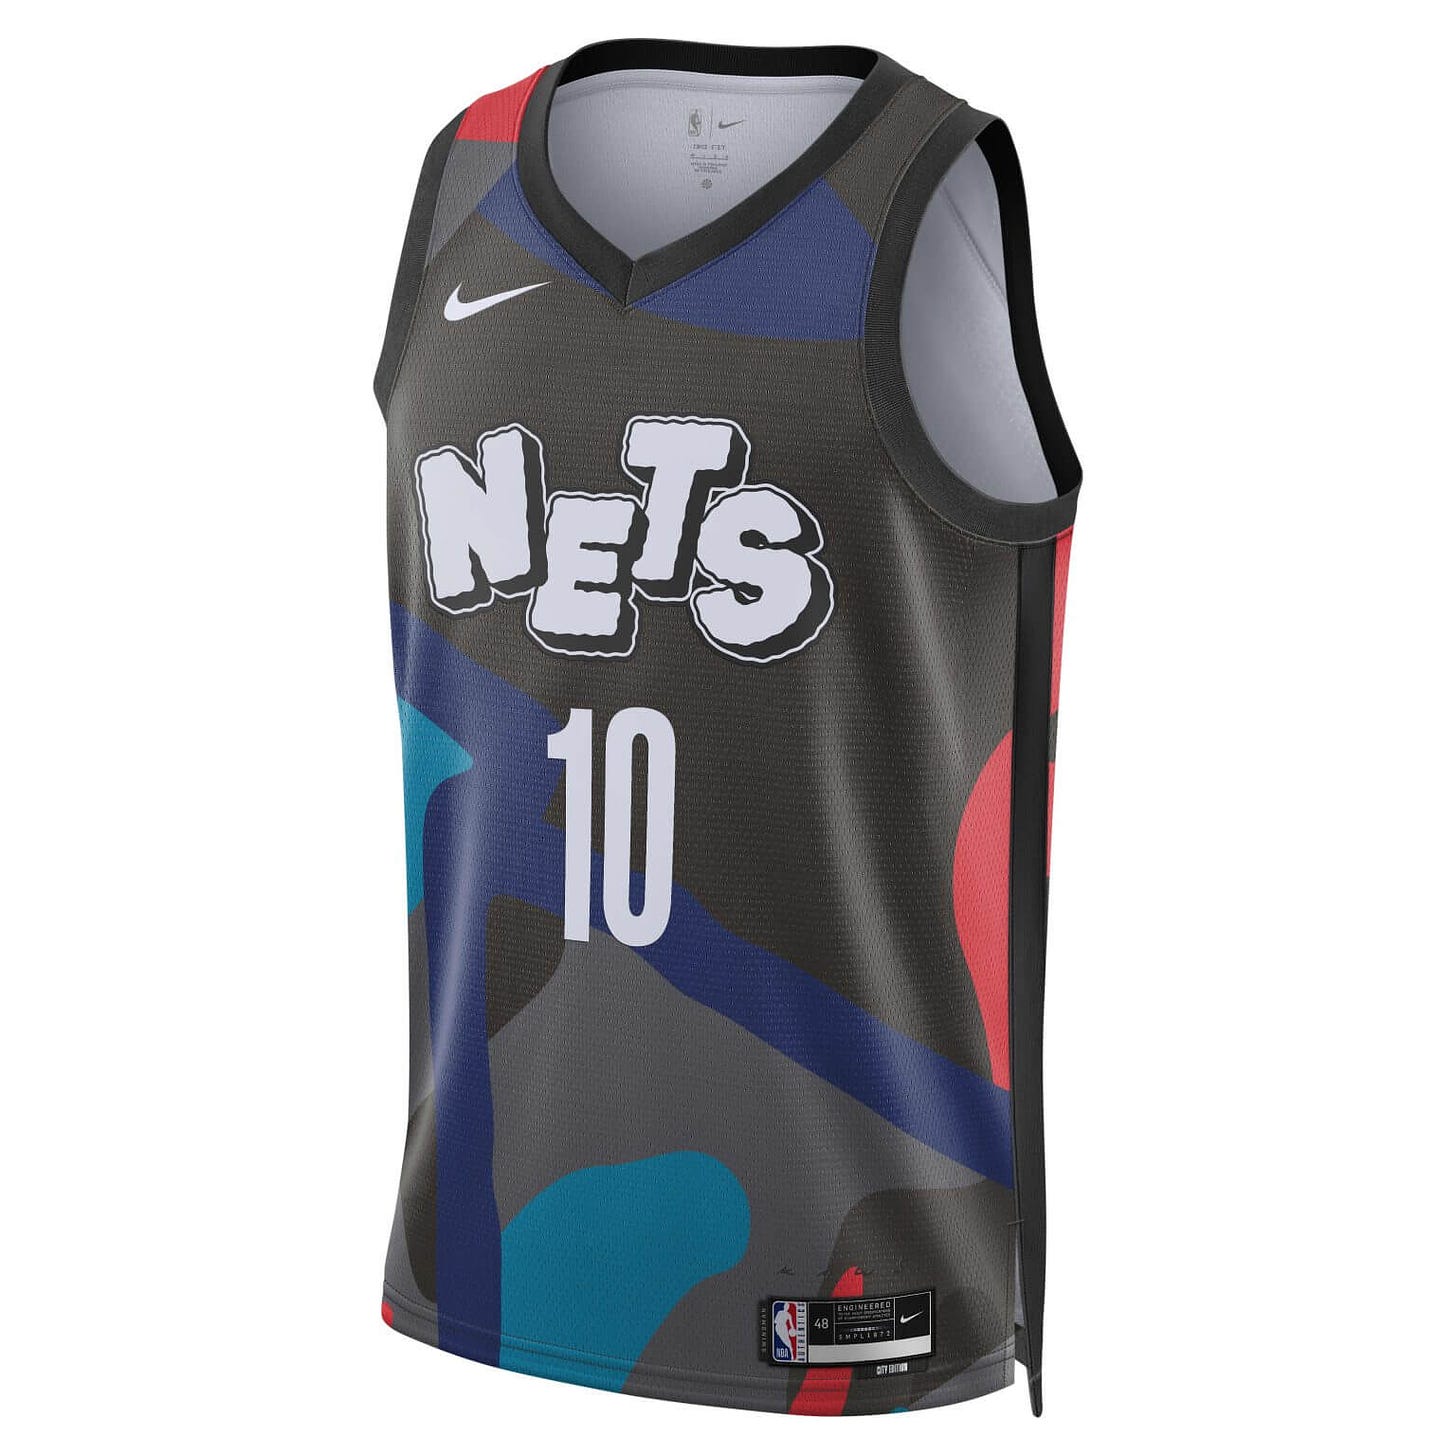 What are your thoughts on this city edition leaked Knicks jersey